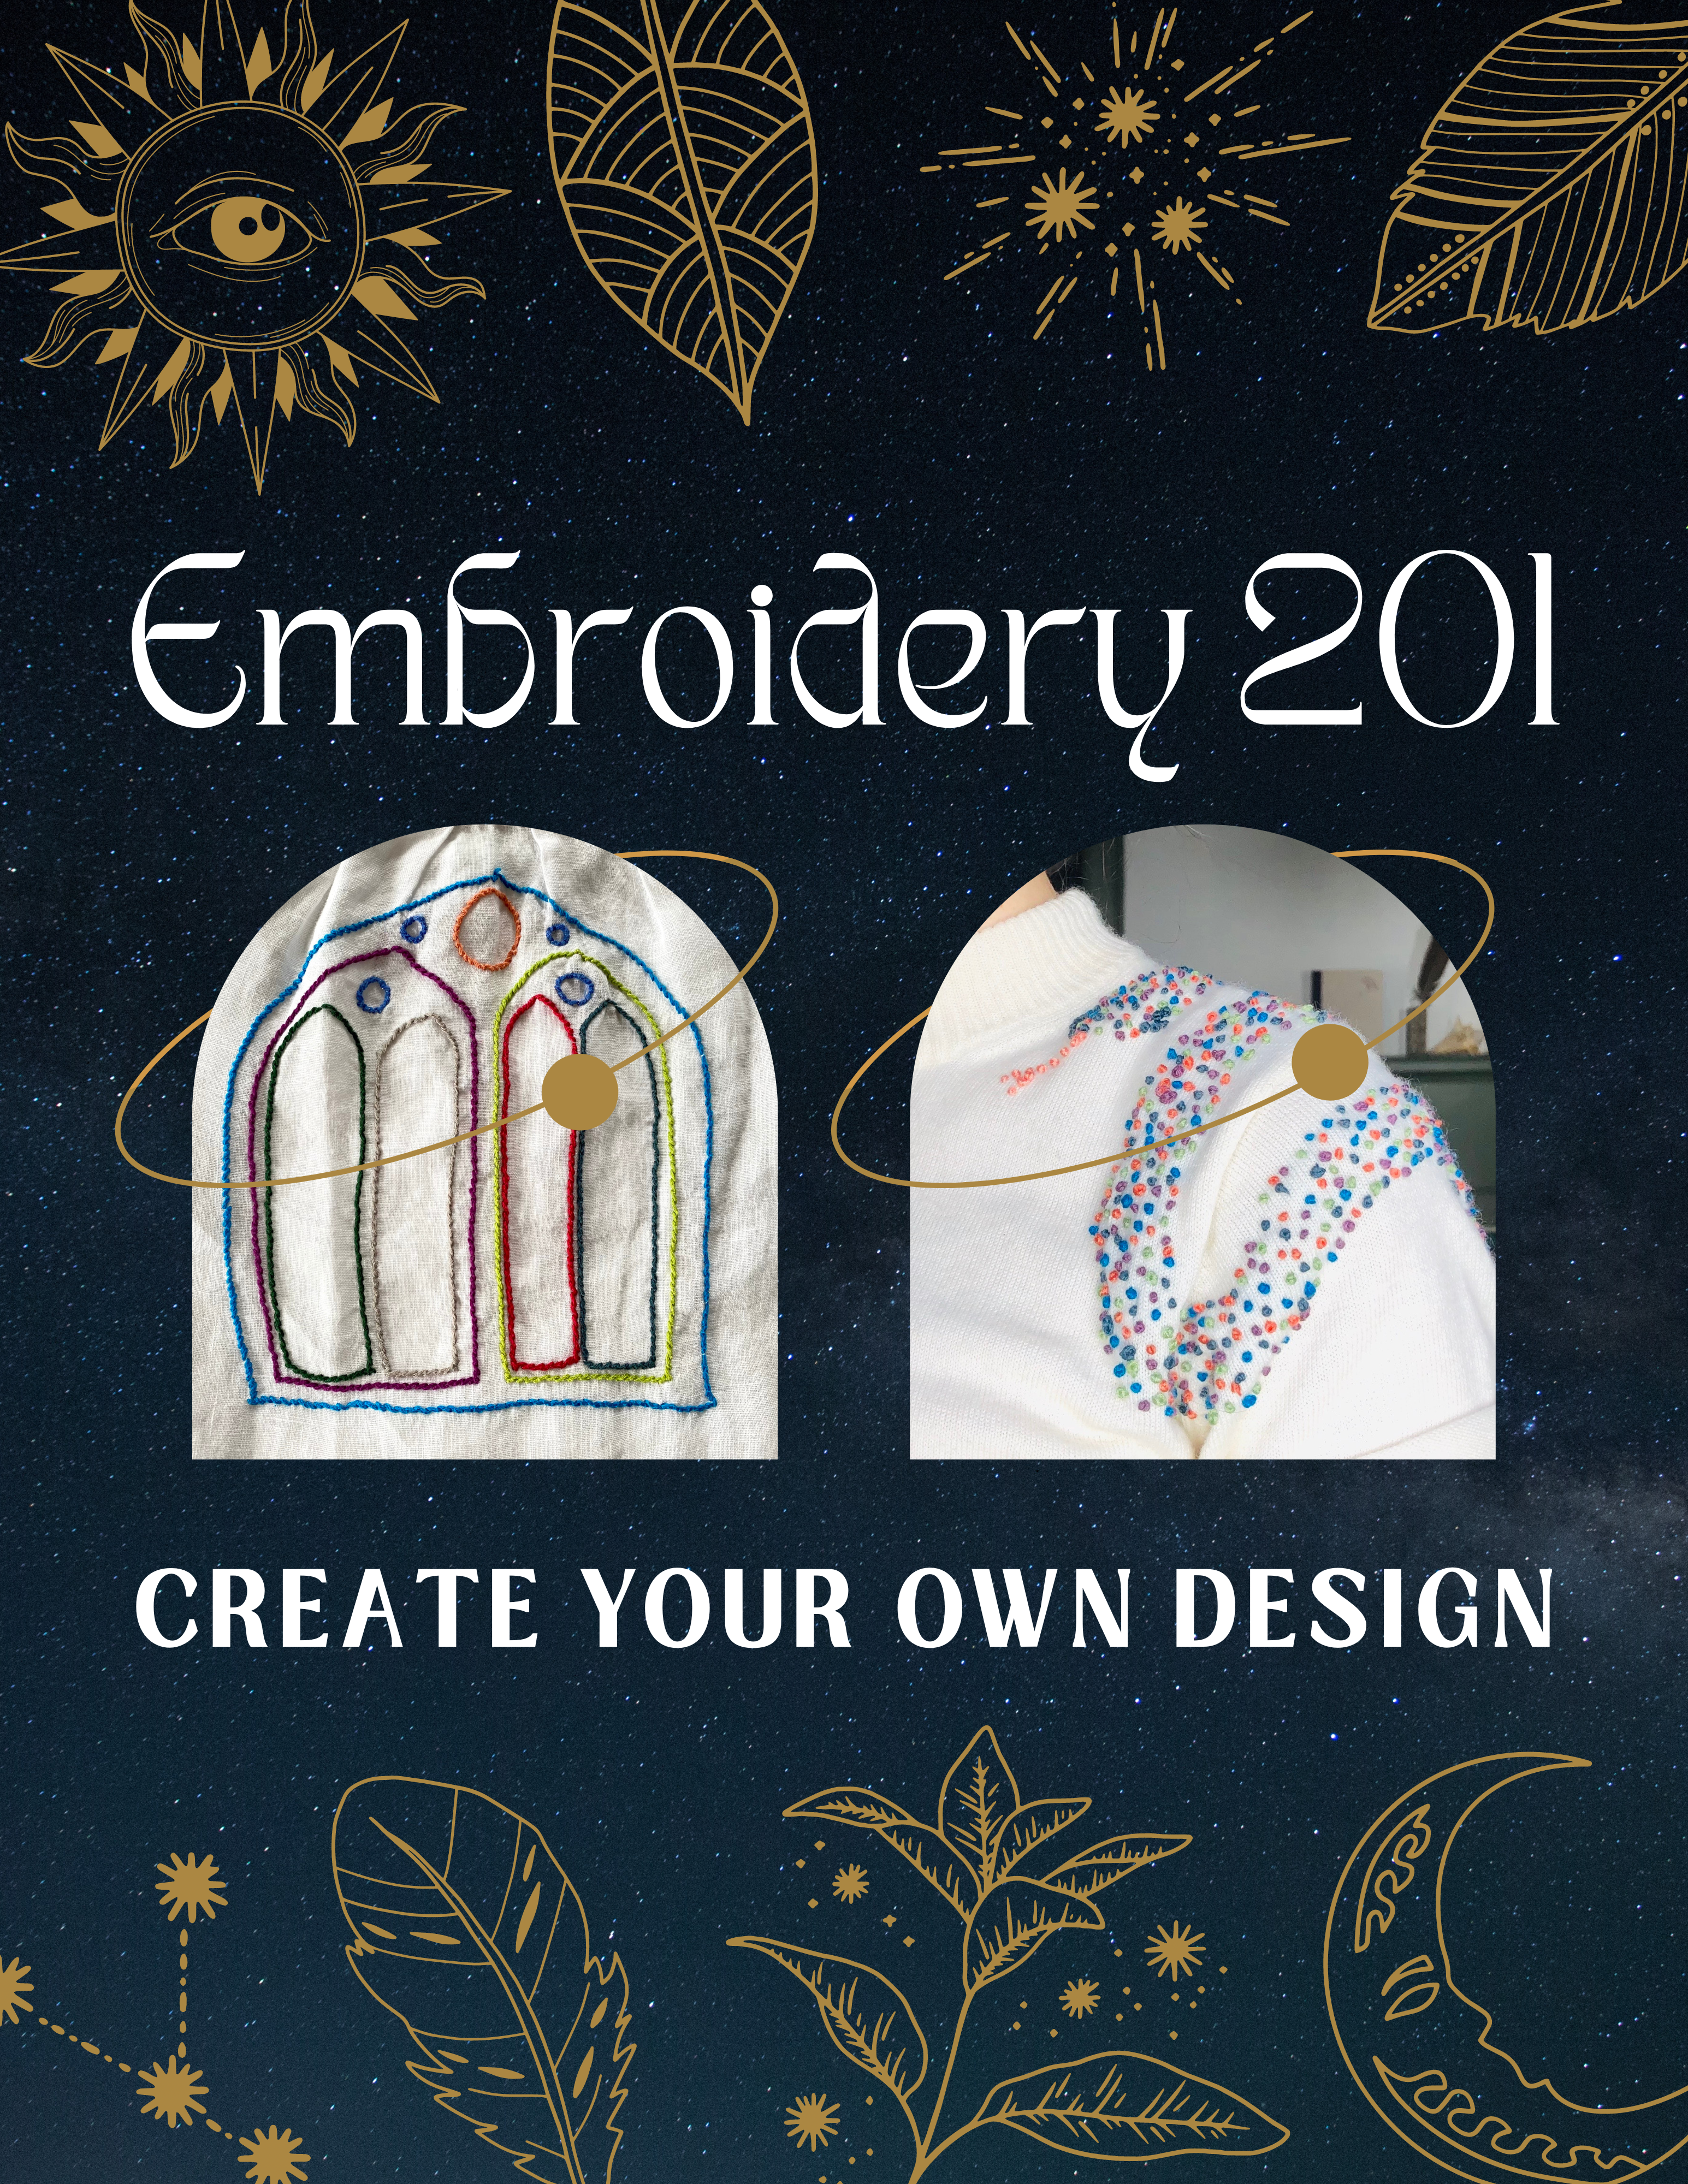 Embroidery 201